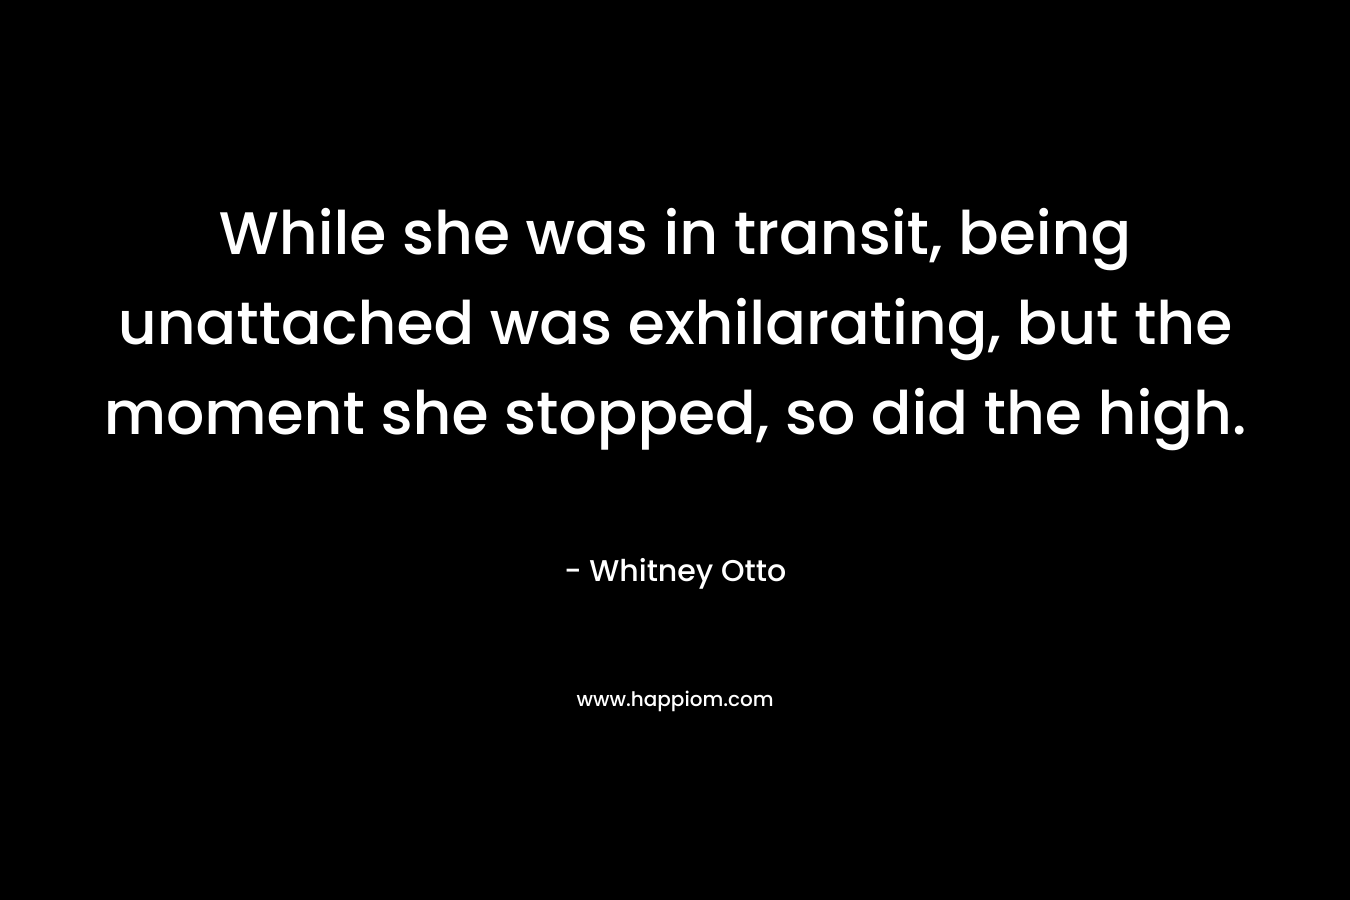 While she was in transit, being unattached was exhilarating, but the moment she stopped, so did the high. – Whitney Otto